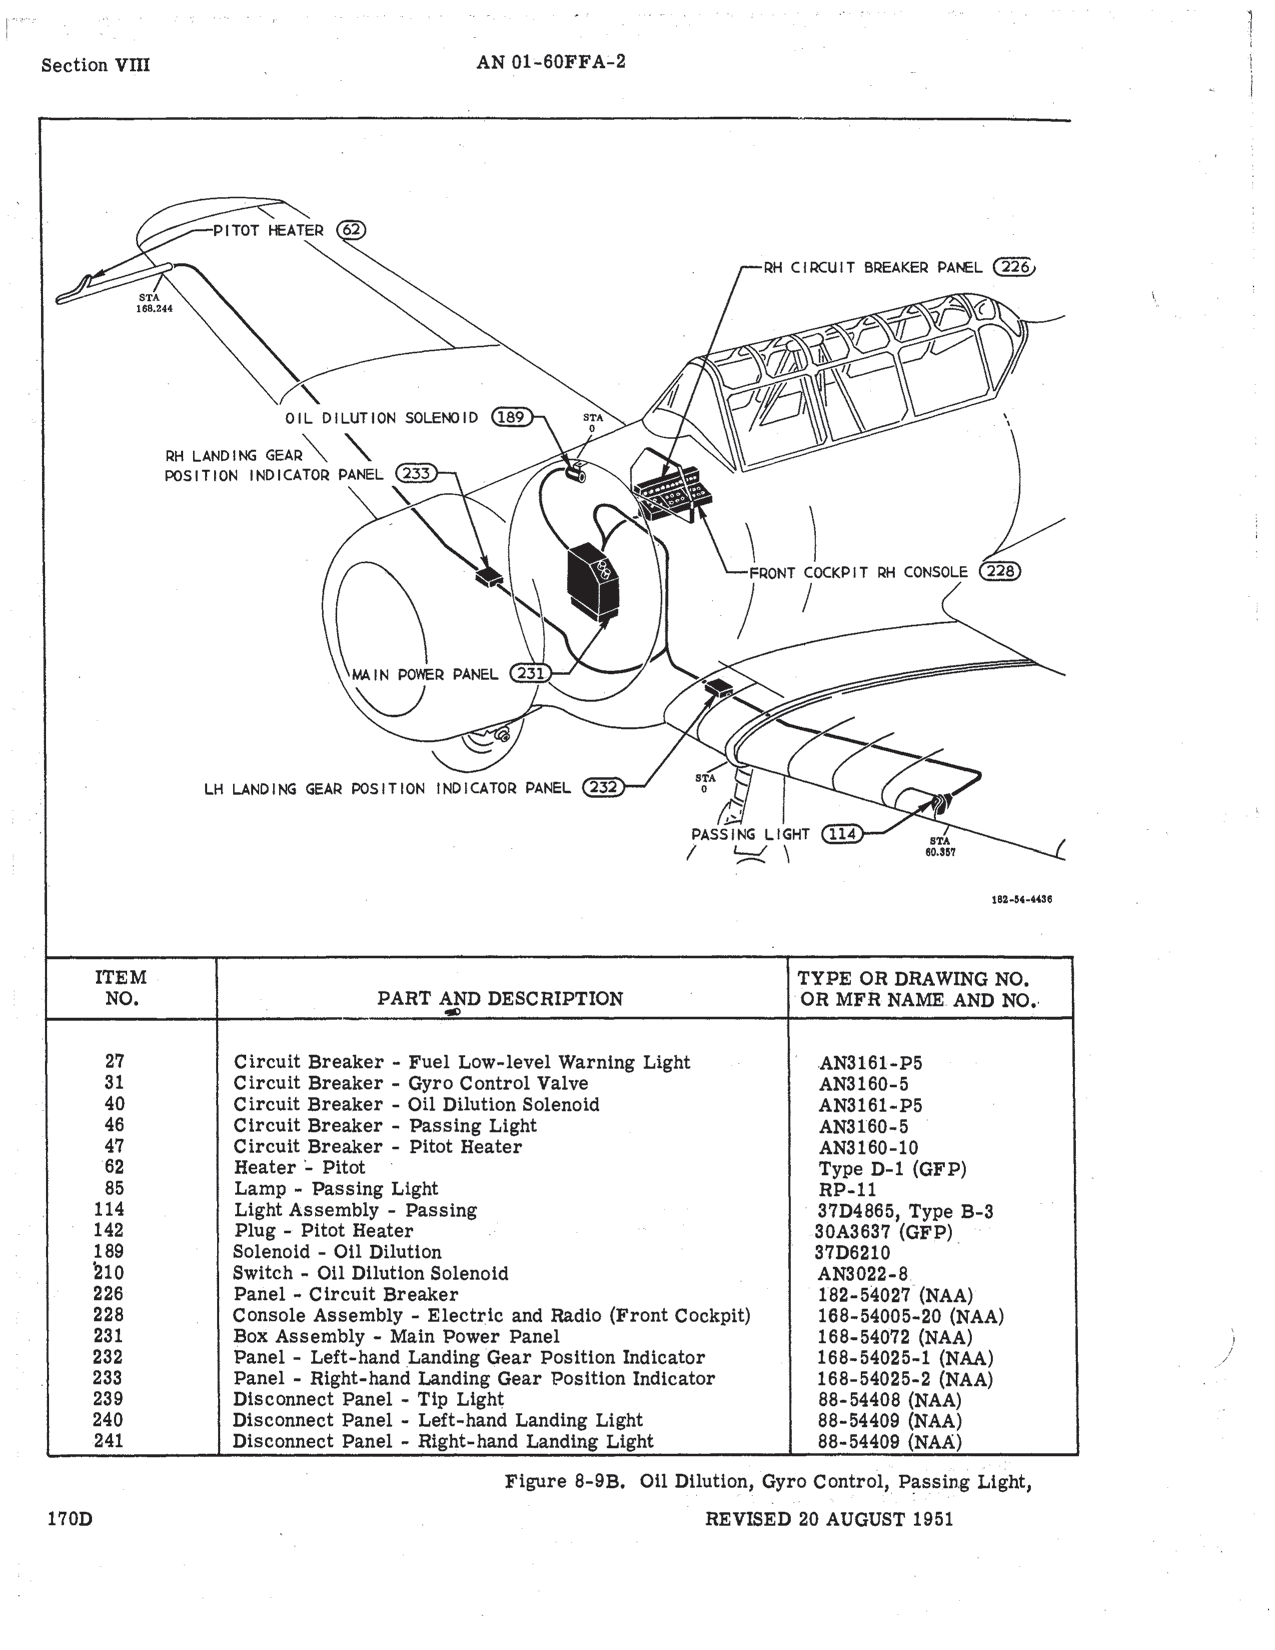 Sample page 253 from AirCorps Library document: Erection & Maintenance - T-6G